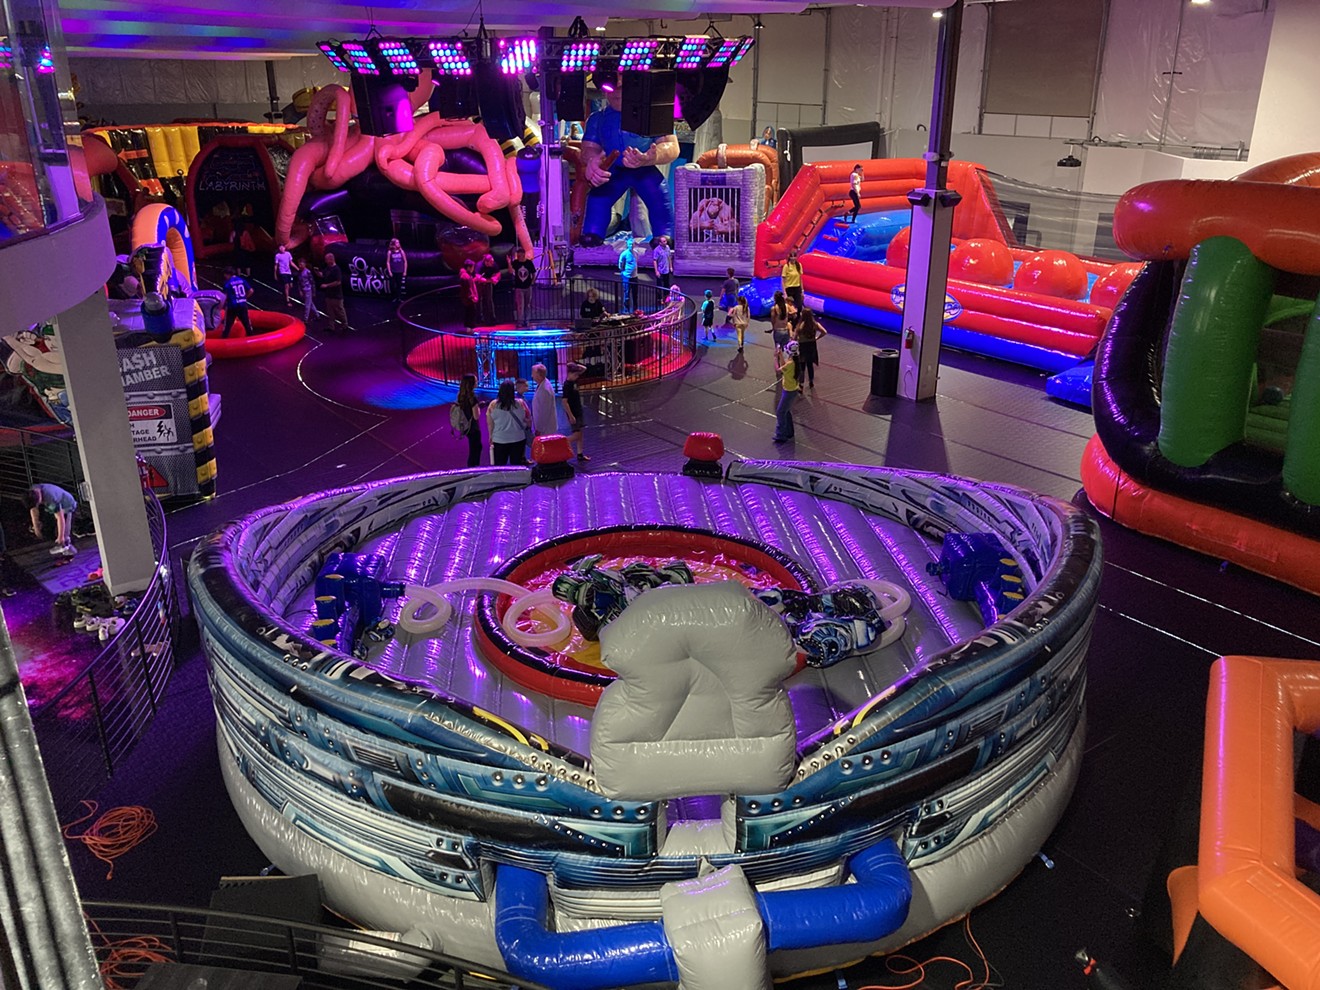 Several of Bounce Empire's inflatable attractions